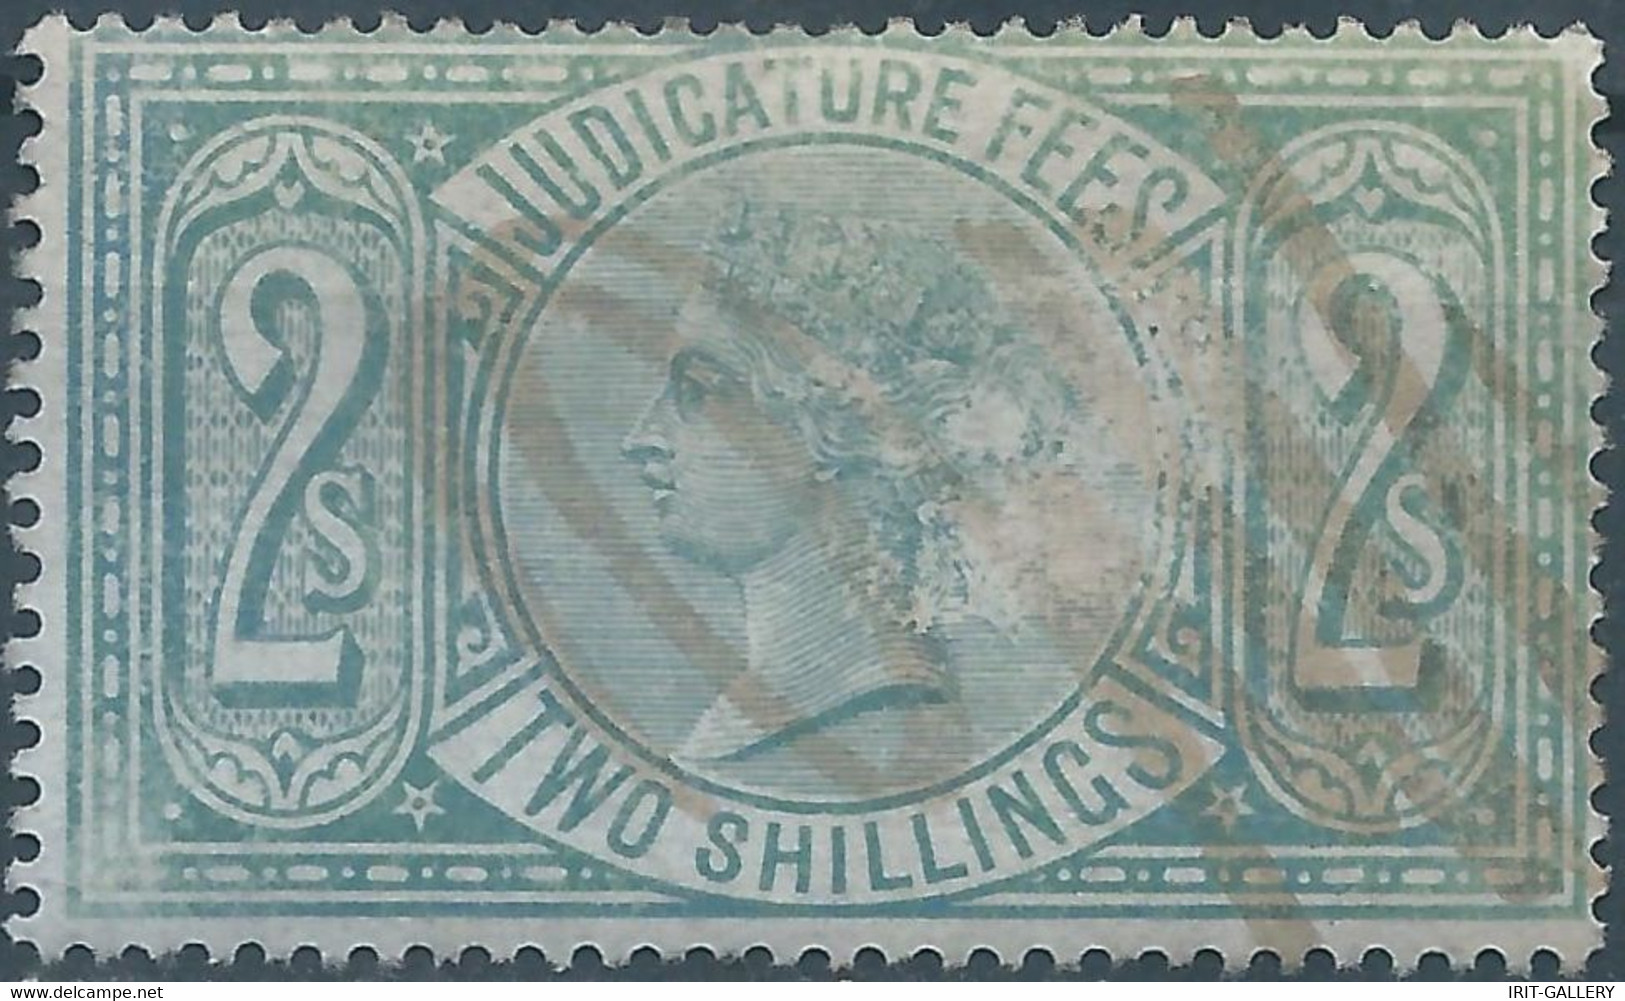 Great Britain-ENGLAND,Queen Victoria,1880-1900 Revenue Stamp Tax Fiscal,JUDICATURE FEES,2 Shillings,Used - Steuermarken